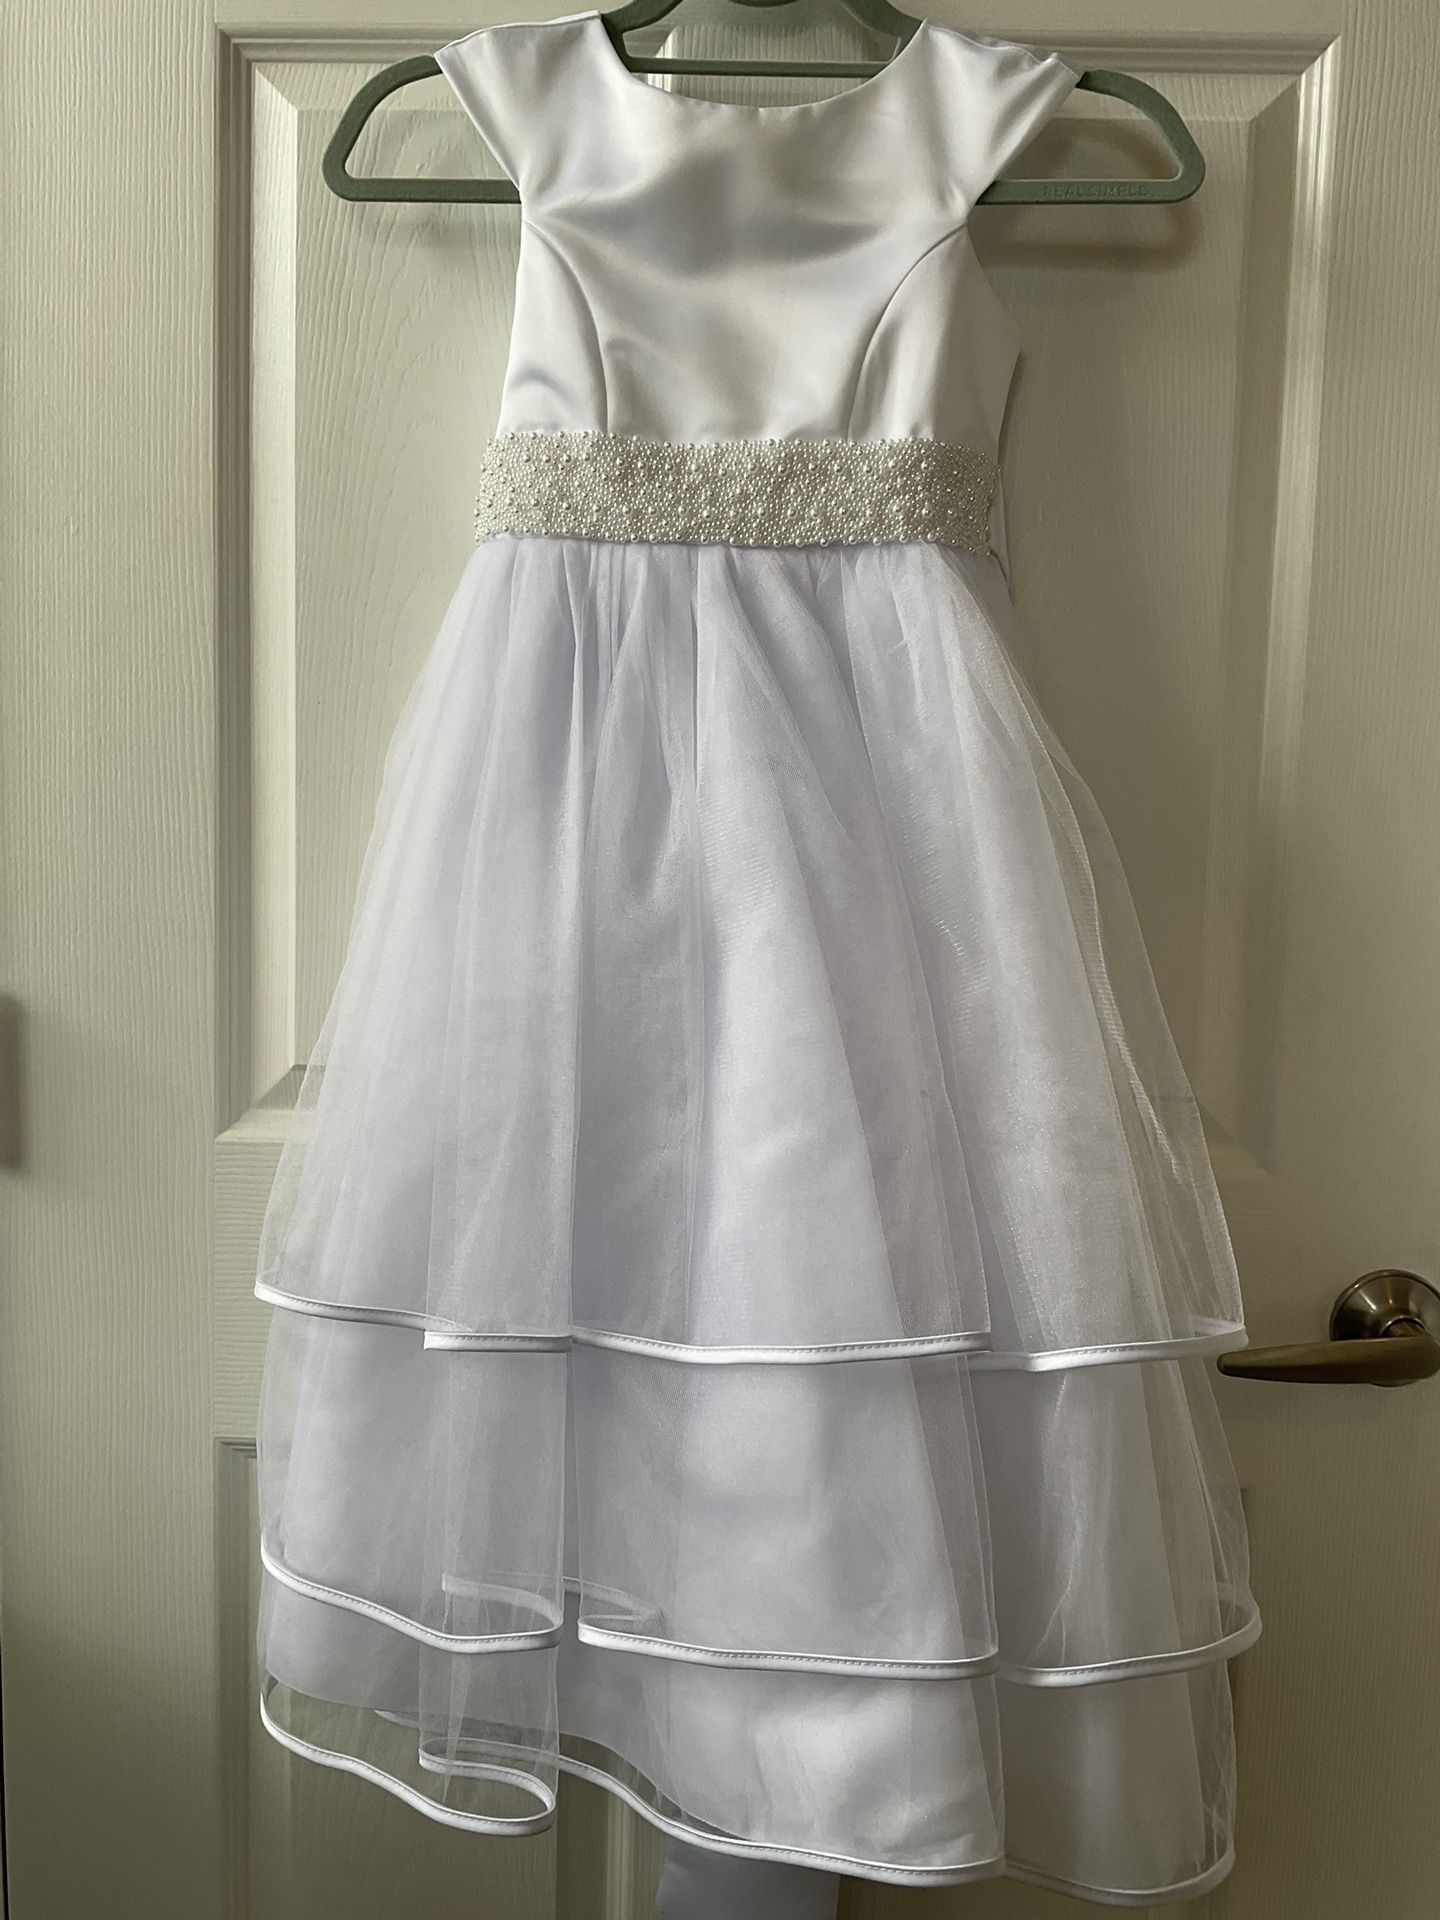 Girl’s White Dress For First Communion, Party, Or Wedding (Flower Girl)  / Size 6 / Worn 1 Time Only